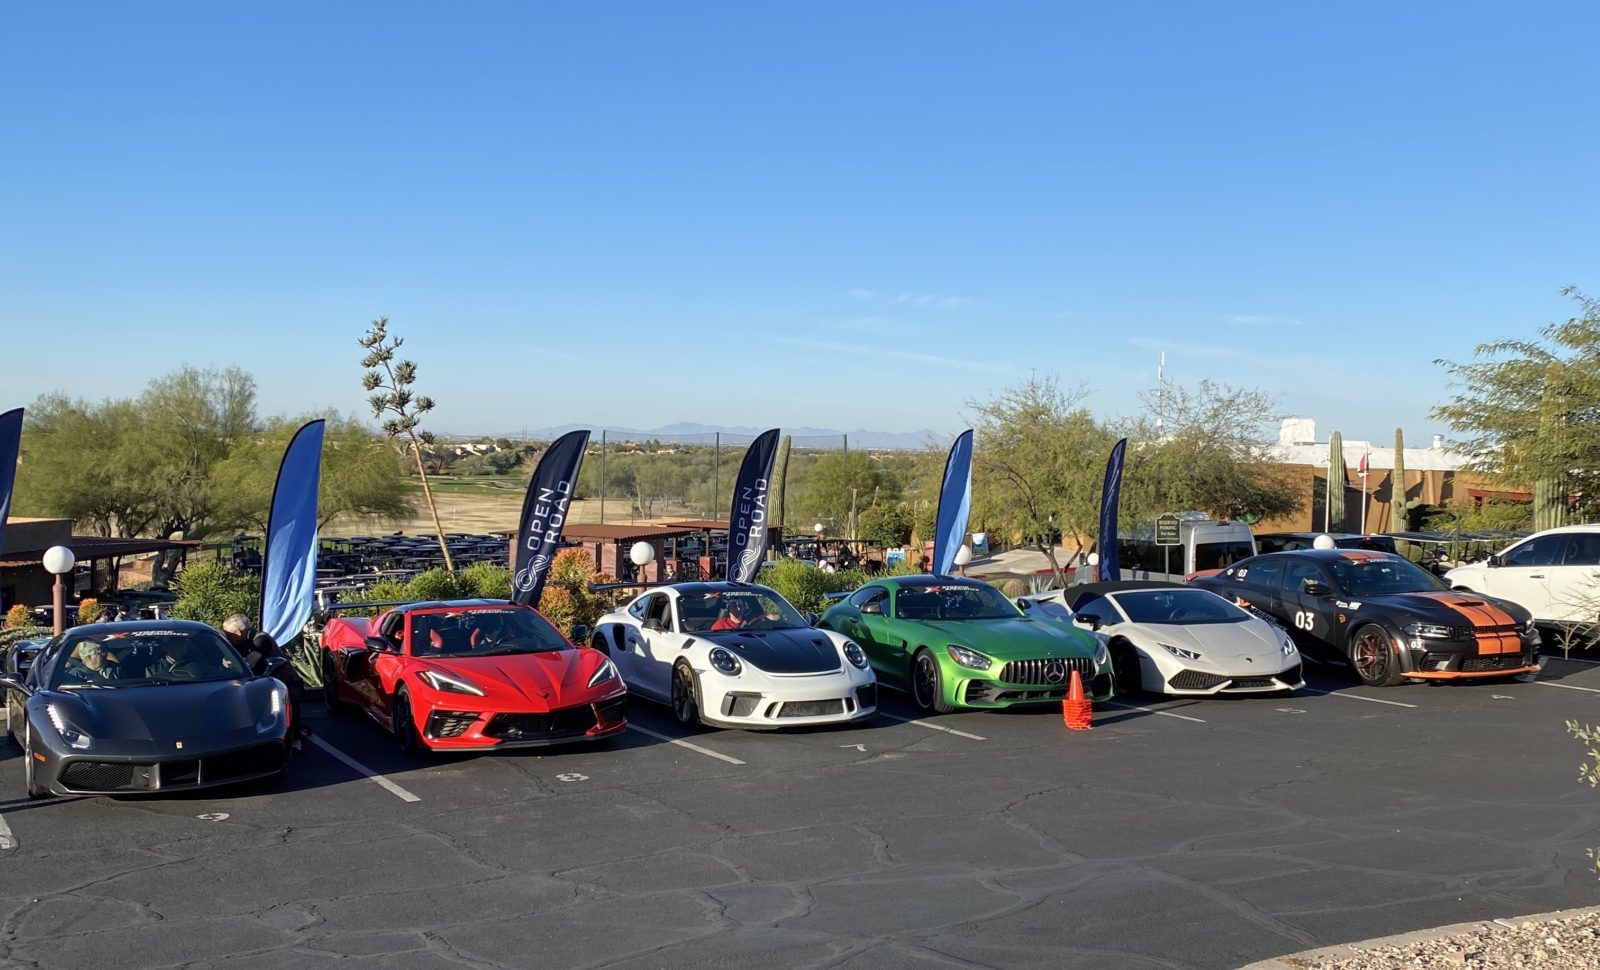 Xtreme Xperience open road cars
